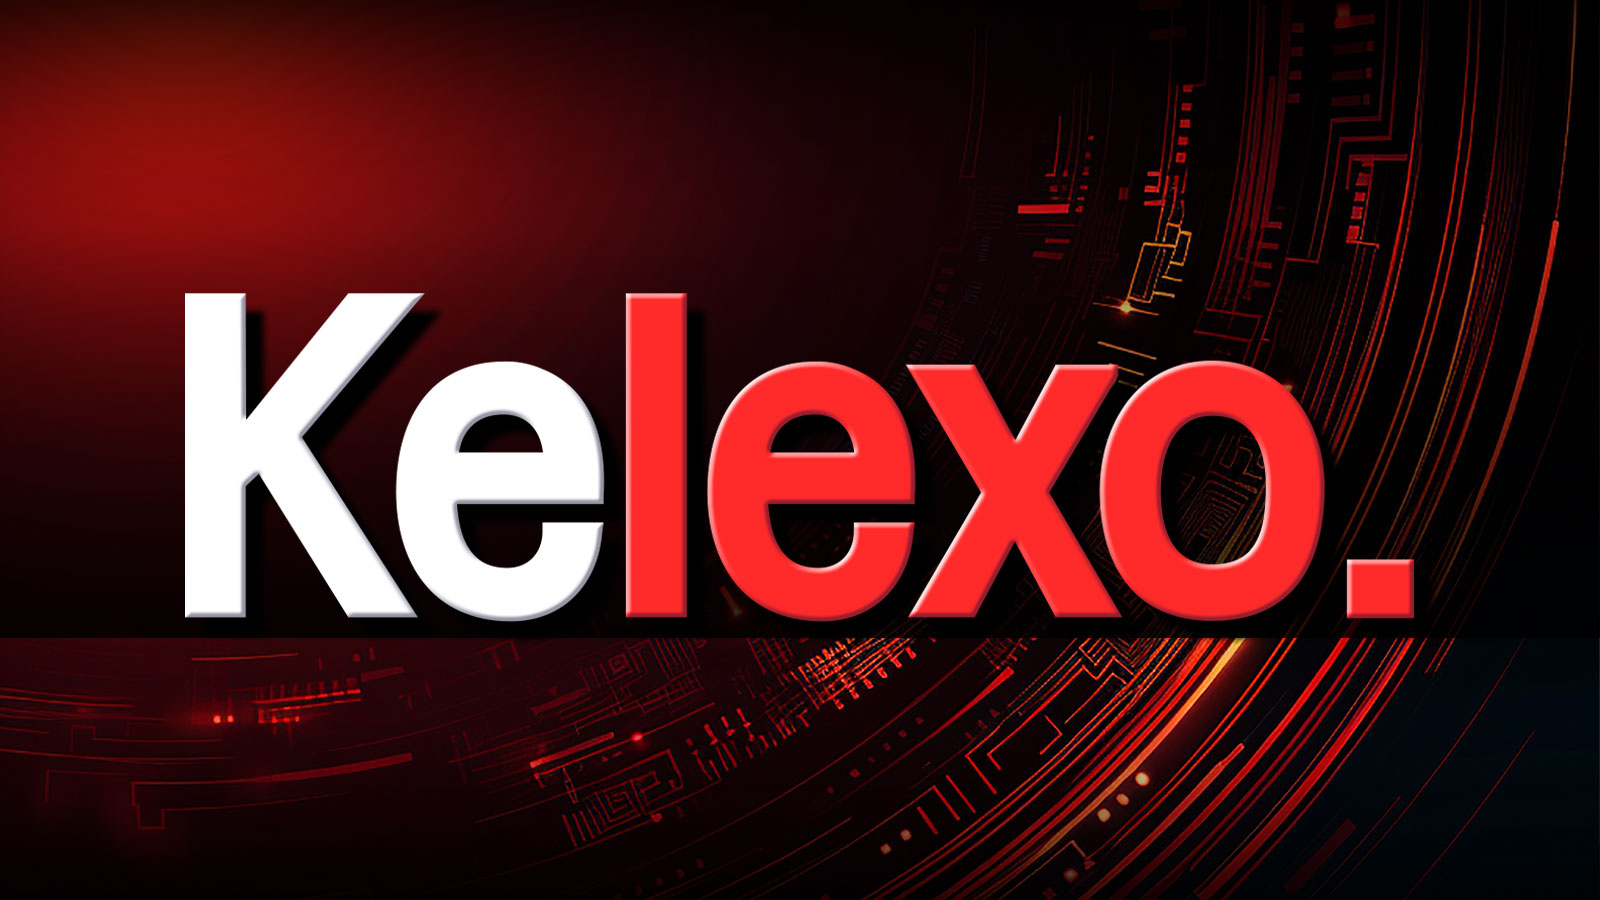 Kelexo (KLXO) Presale Is Live, Bitcoin (BTC) and Ethereum (ETH) Traders Show Increasing Interest